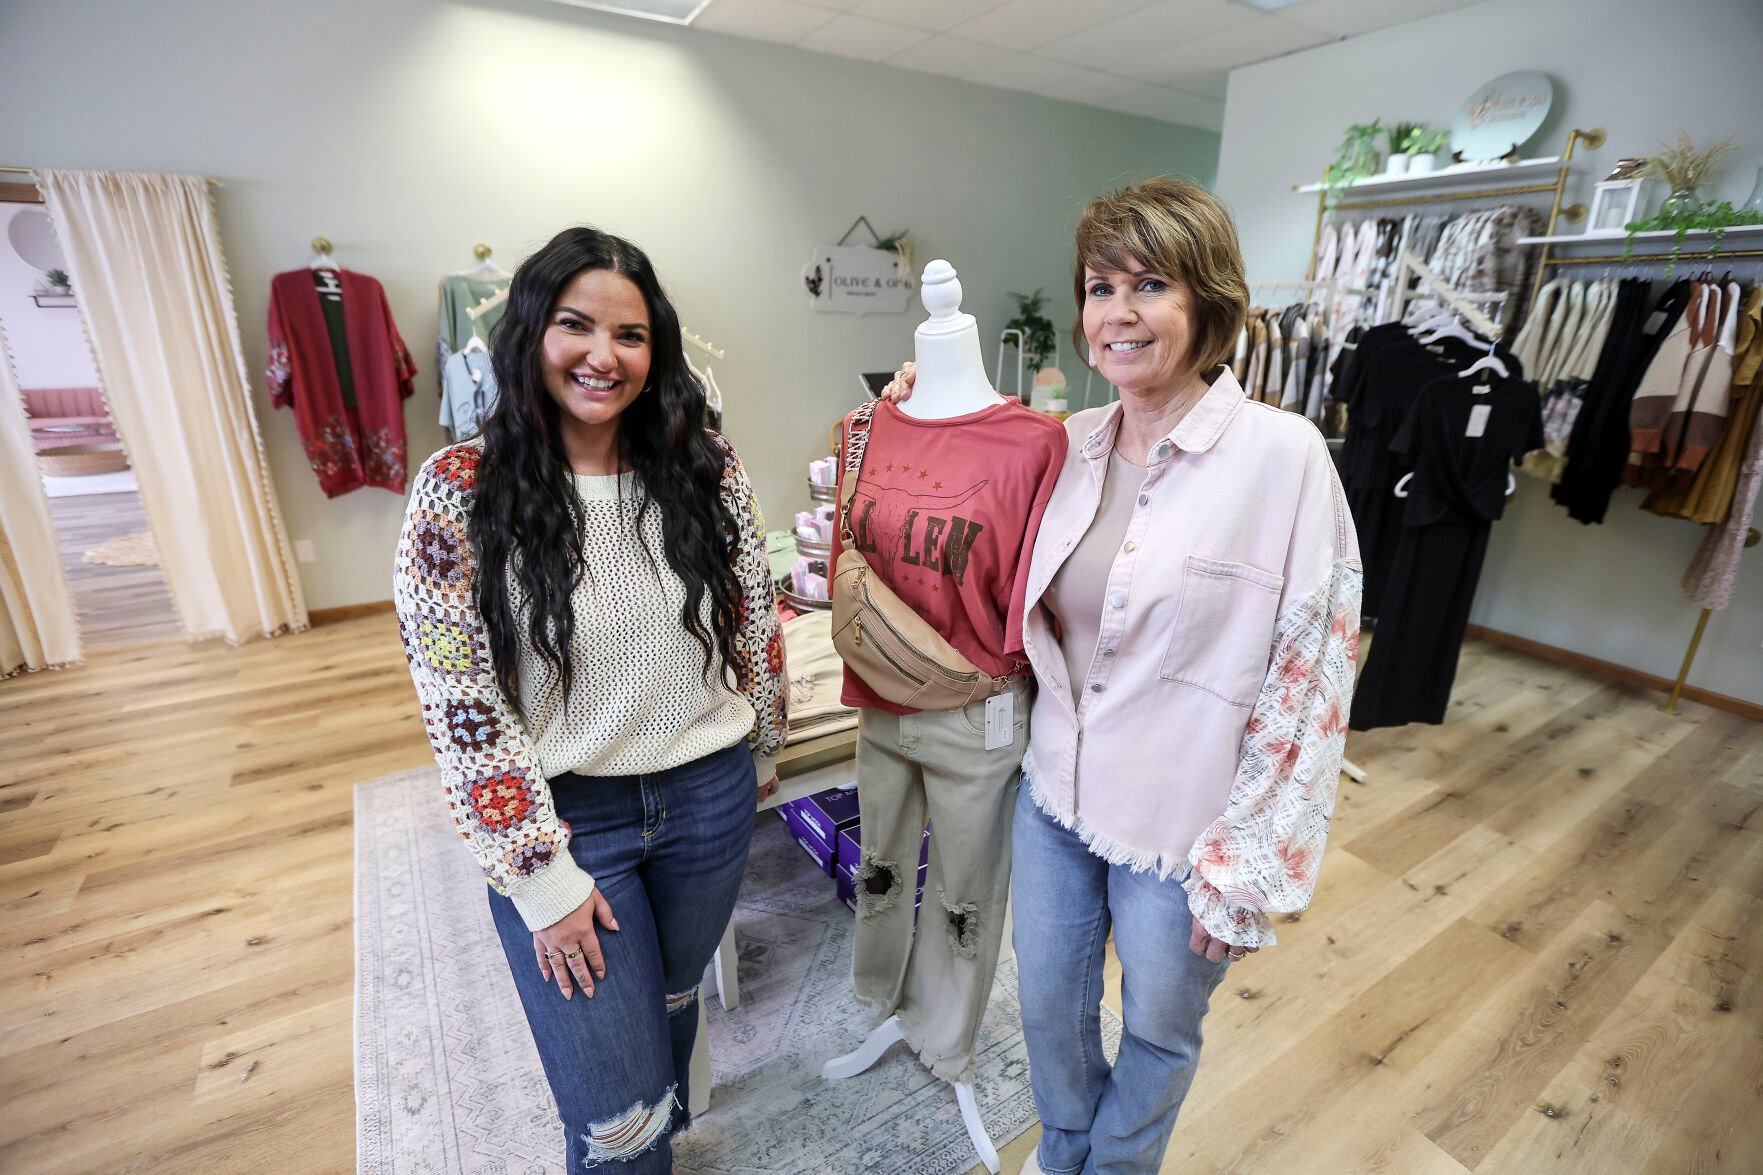 Abby Gloeckner (left) and her mom Jan Gloeckner are co-owners of Olive & Opal Clothing Boutique in Dubuque.    PHOTO CREDIT: Dave Kettering